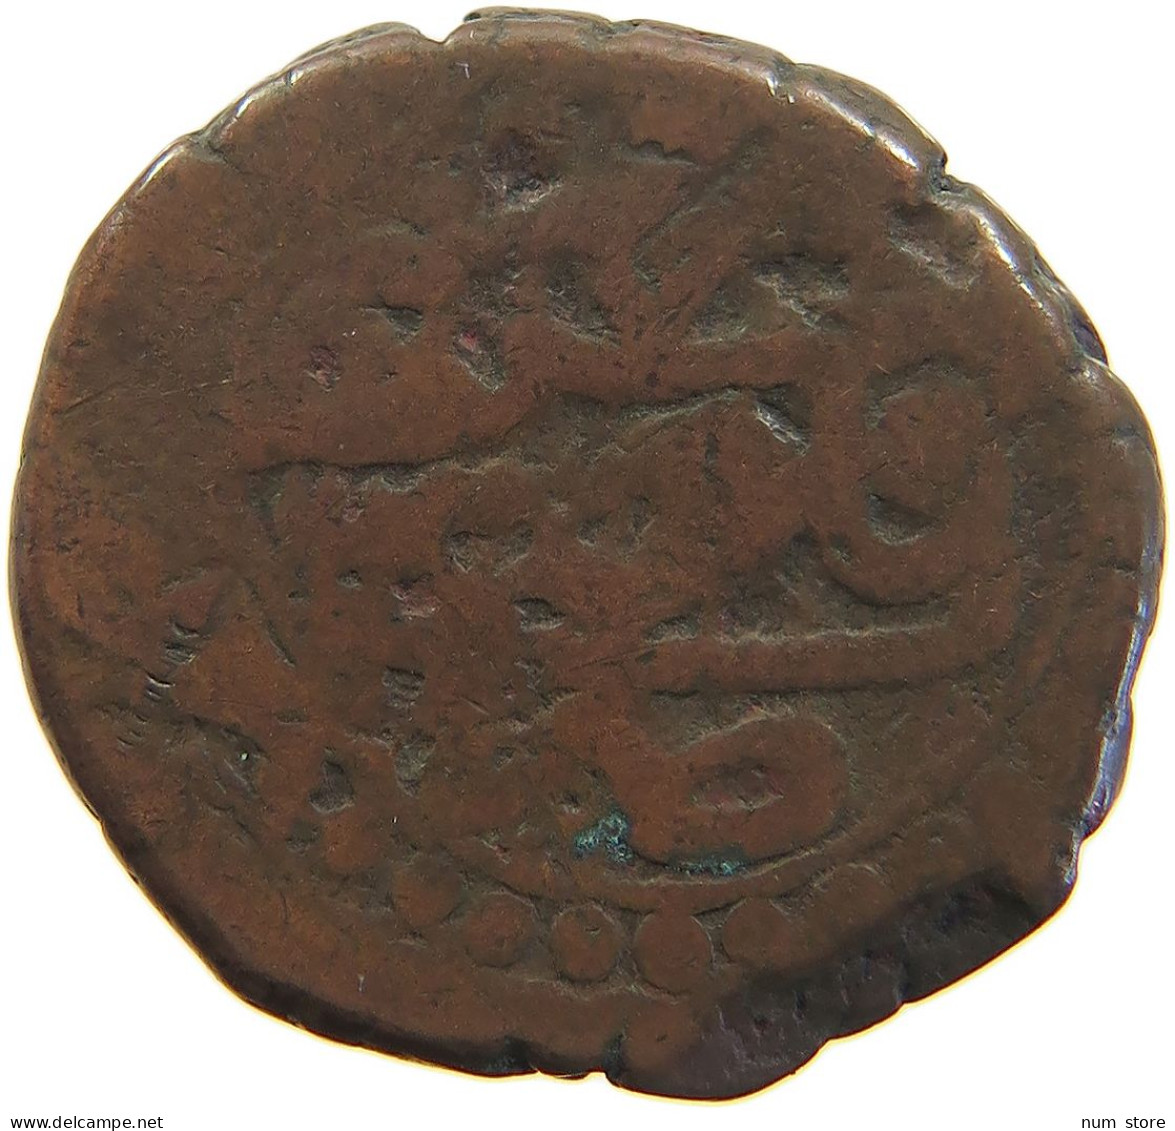 ISLAMIC FALUS FALS PEACOCK RIGHT FIGURATIVE COINAGES IRAN / PERSIA / AFGHANISTAN 20MM 6.5G #t034 0105 - Irán